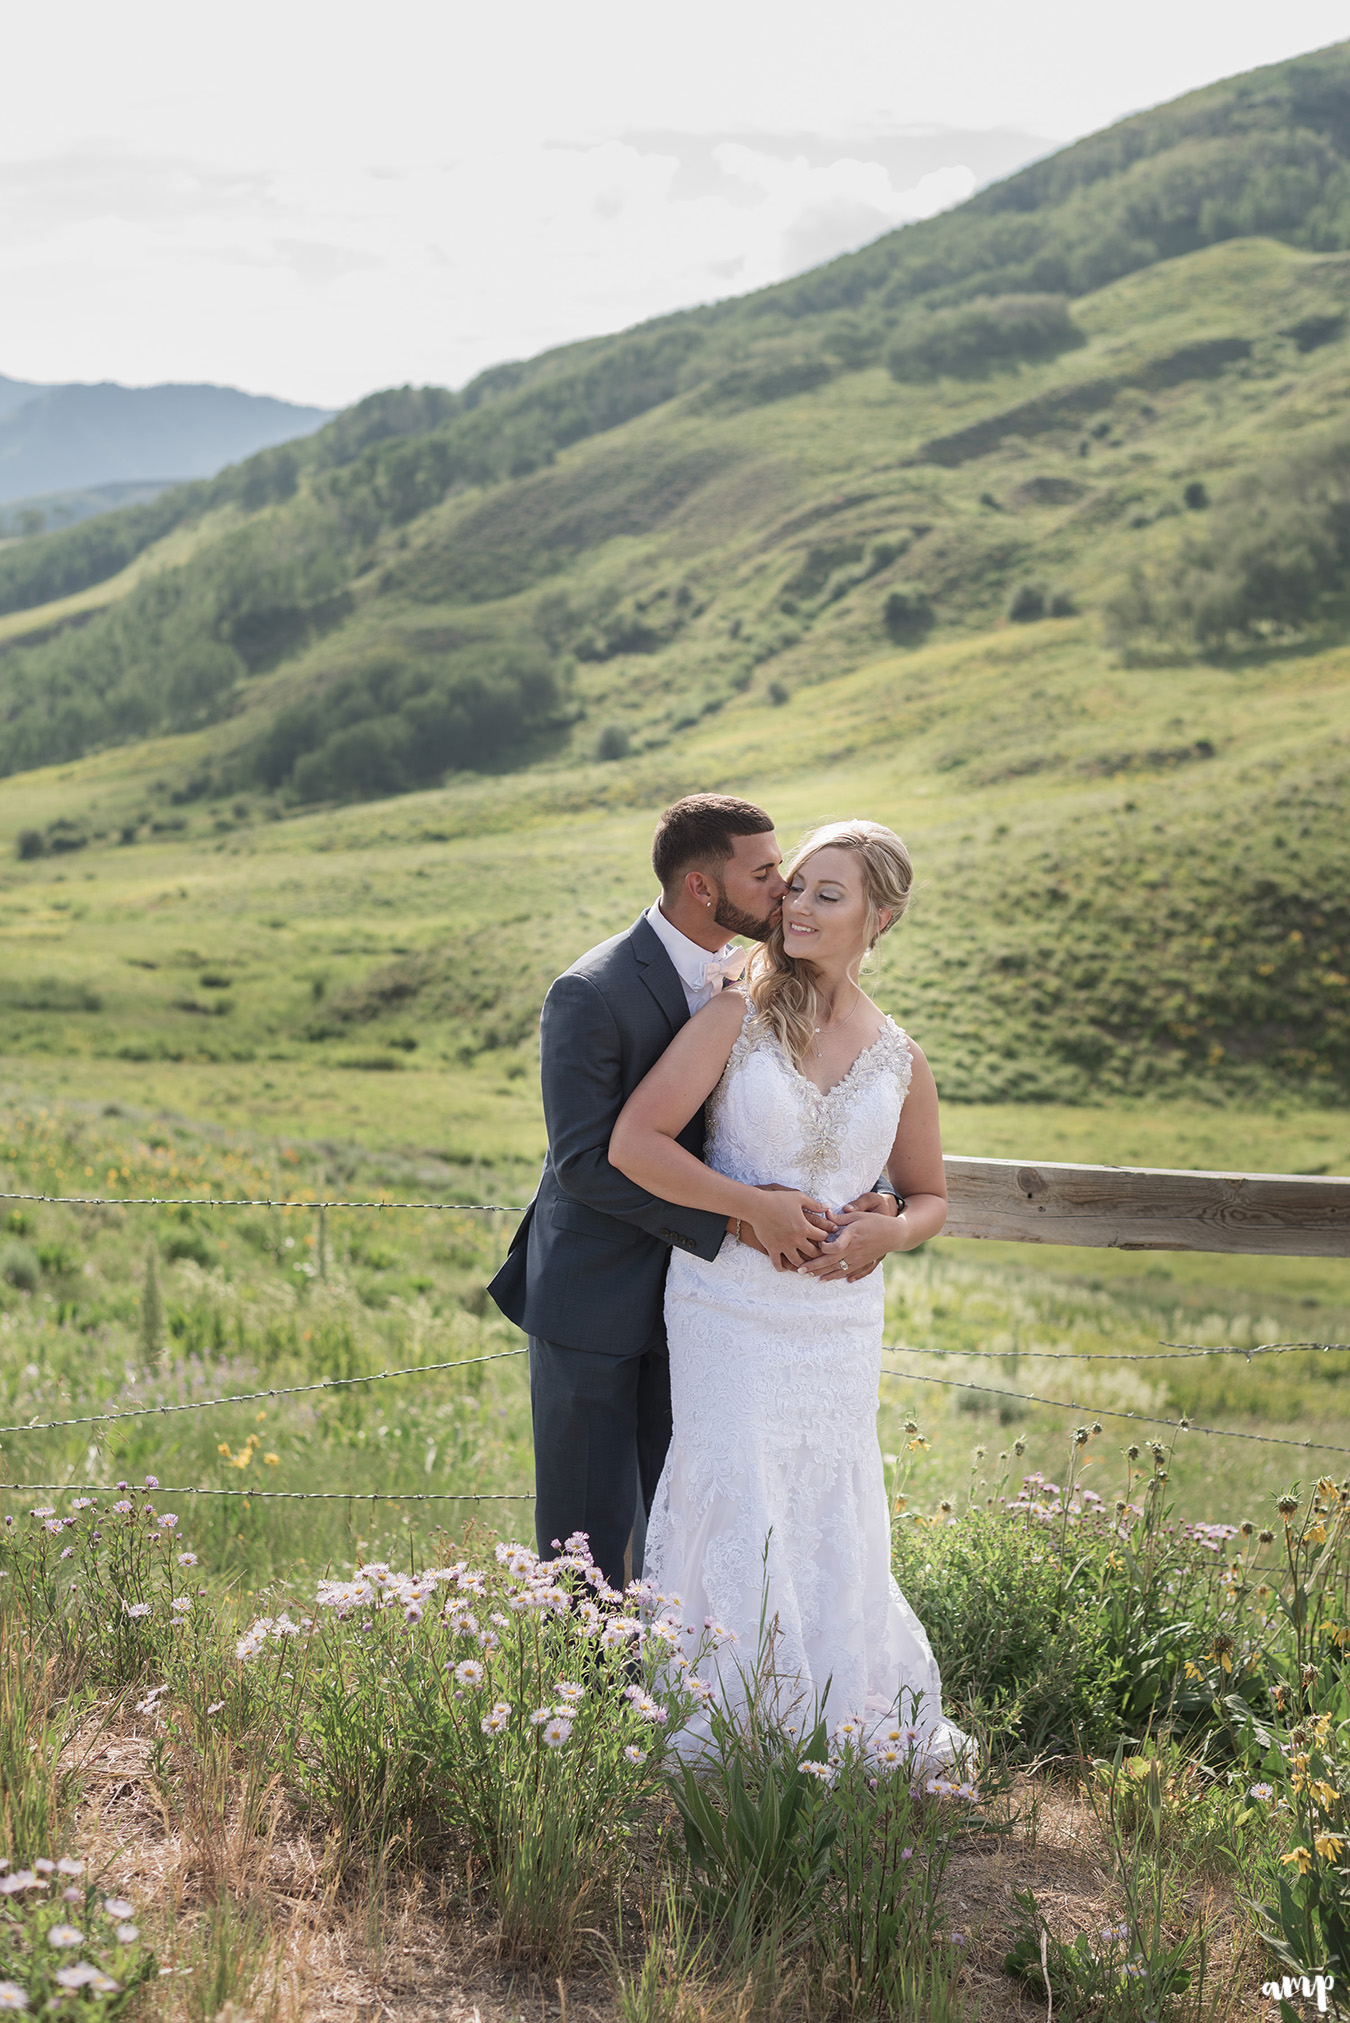 Bride and groom sharing a kiss among the wildflowers with mountains in the distance